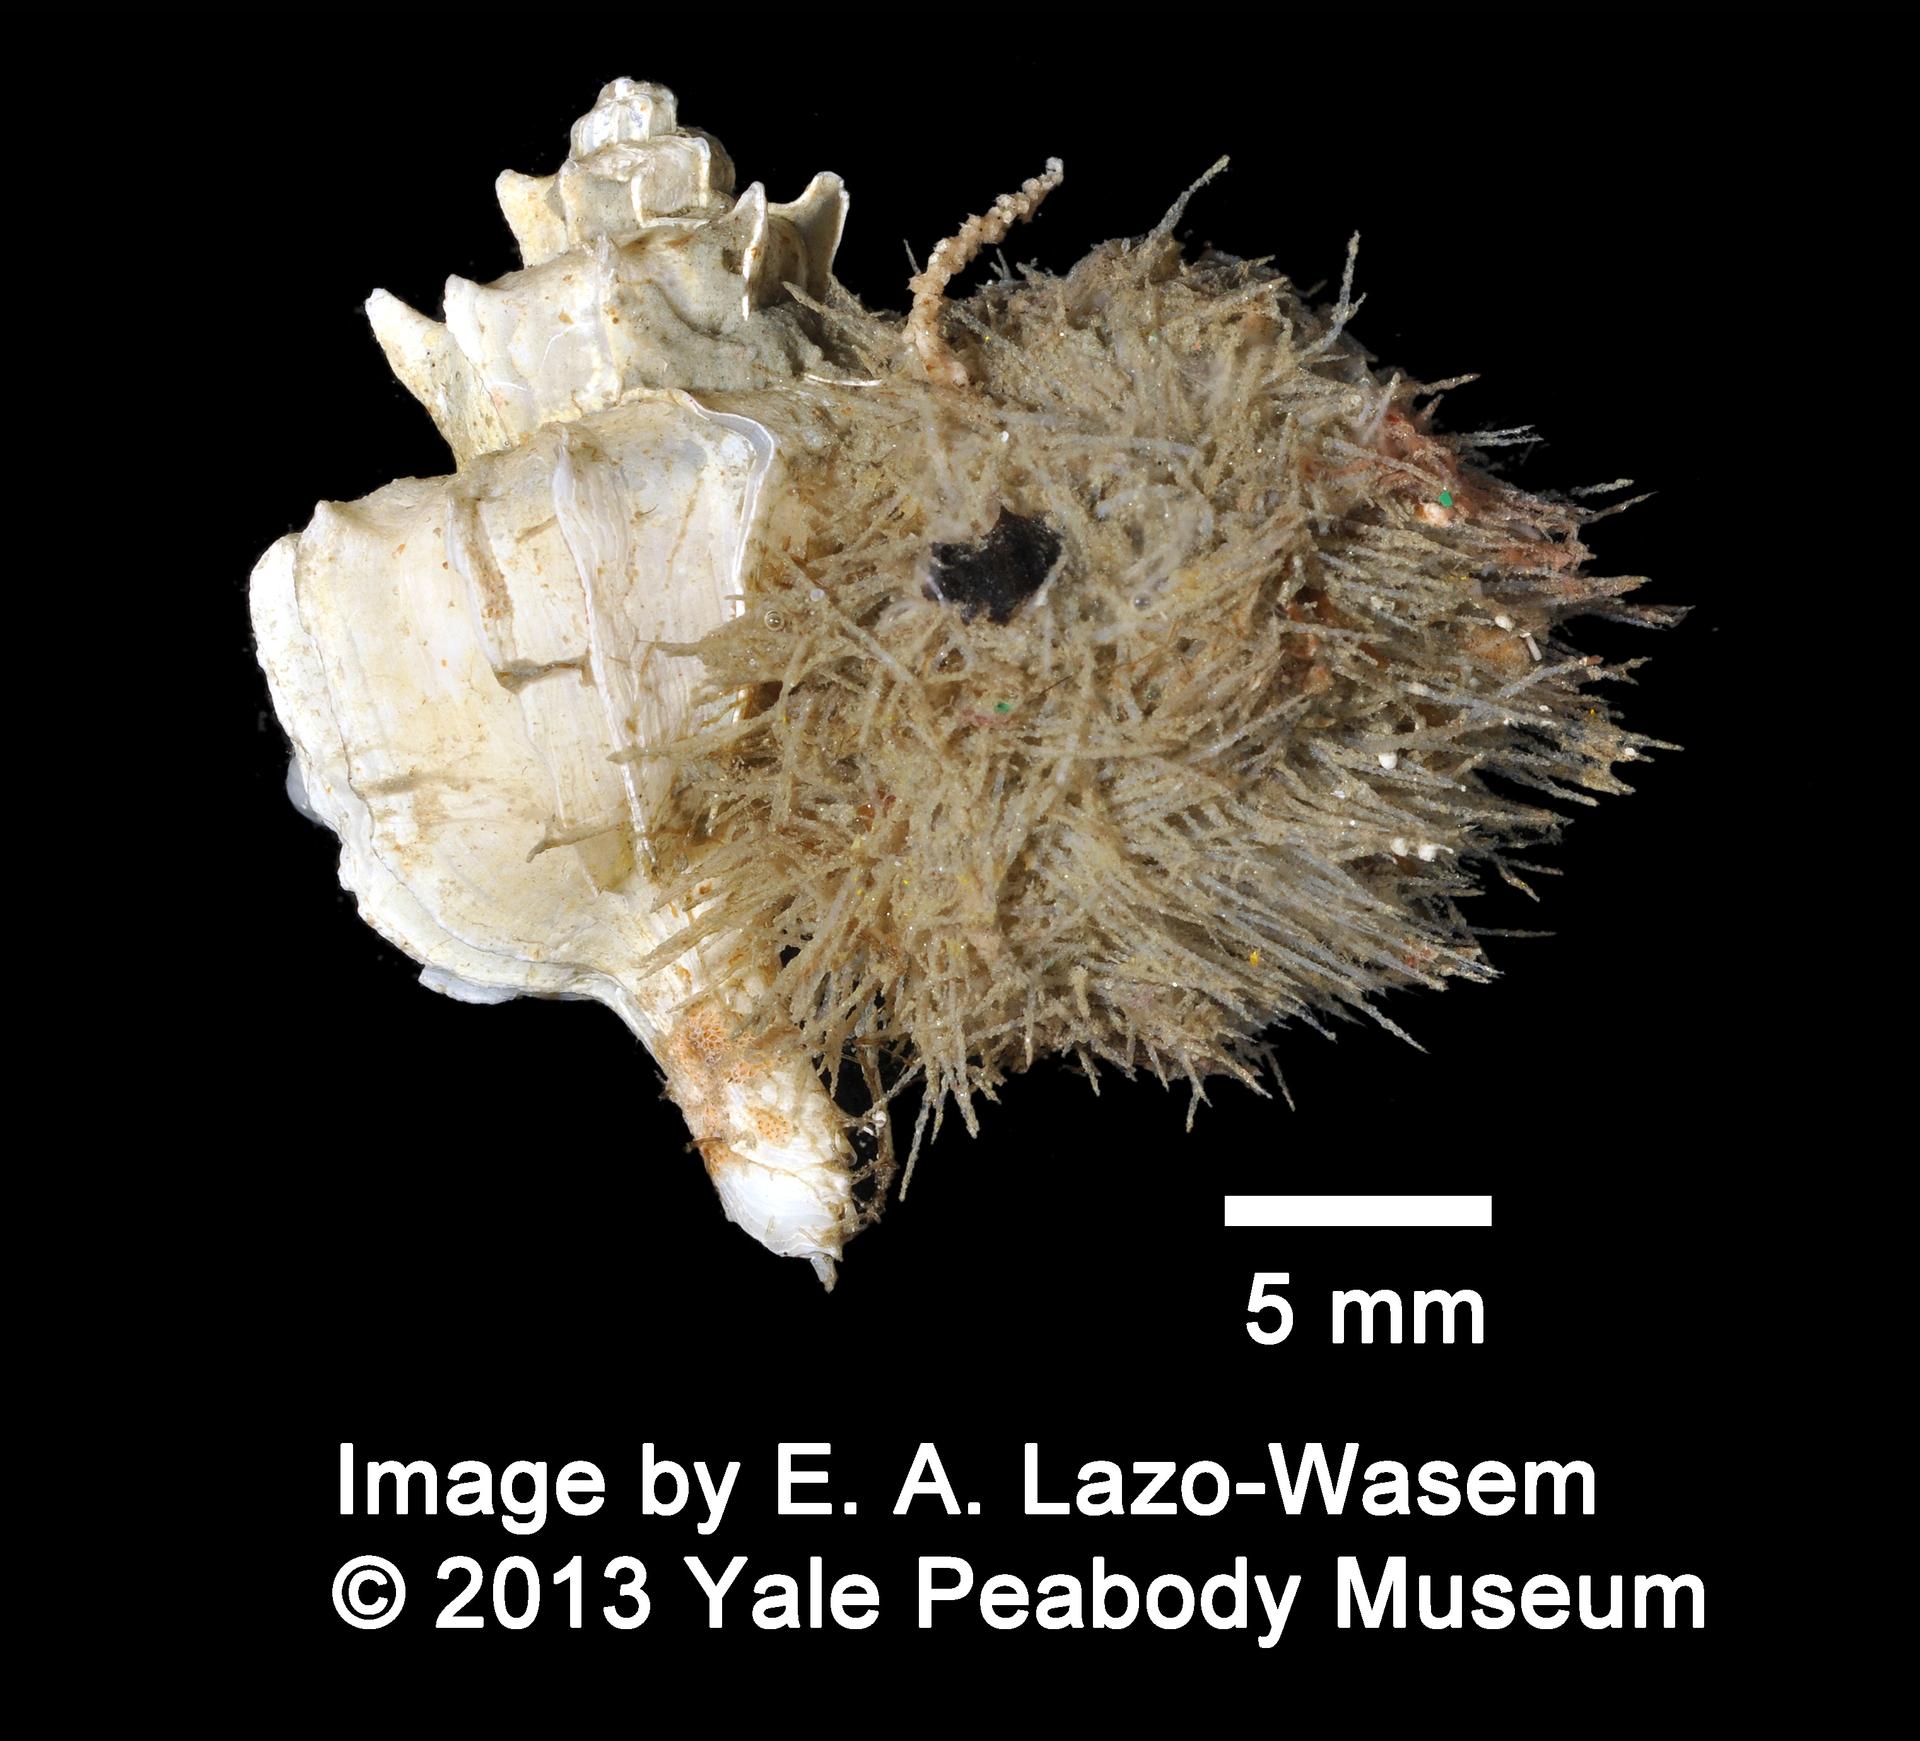 To Yale Peabody Museum of Natural History (YPM IZ 060800)